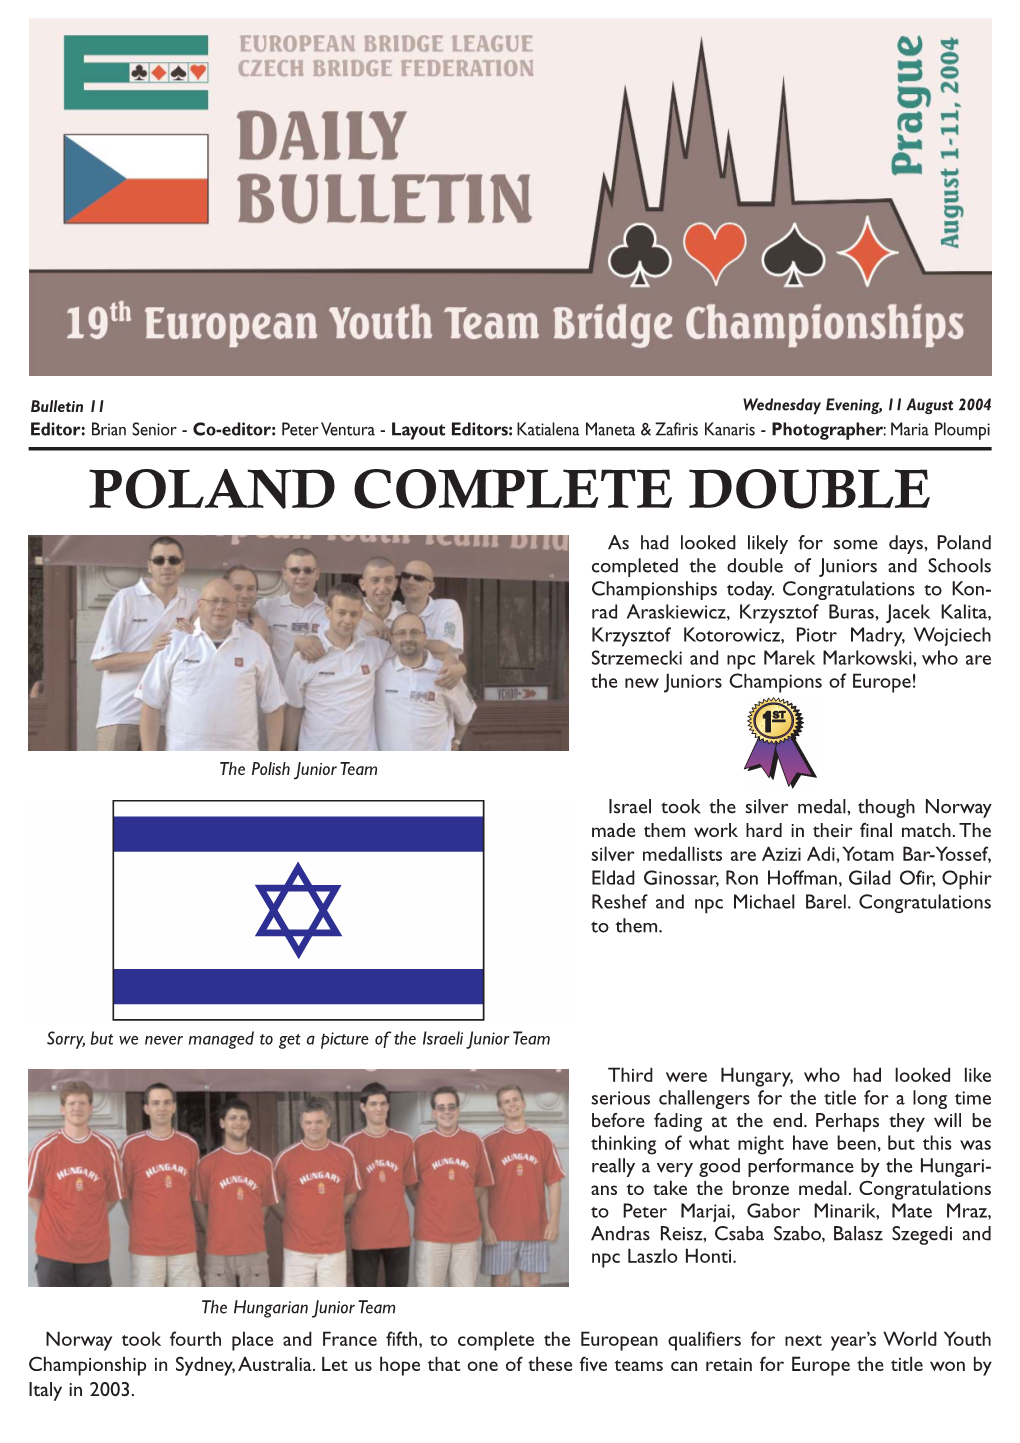 POLAND COMPLETE DOUBLE As Had Looked Likely for Some Days, Poland Completed the Double of Juniors and Schools Championships Today